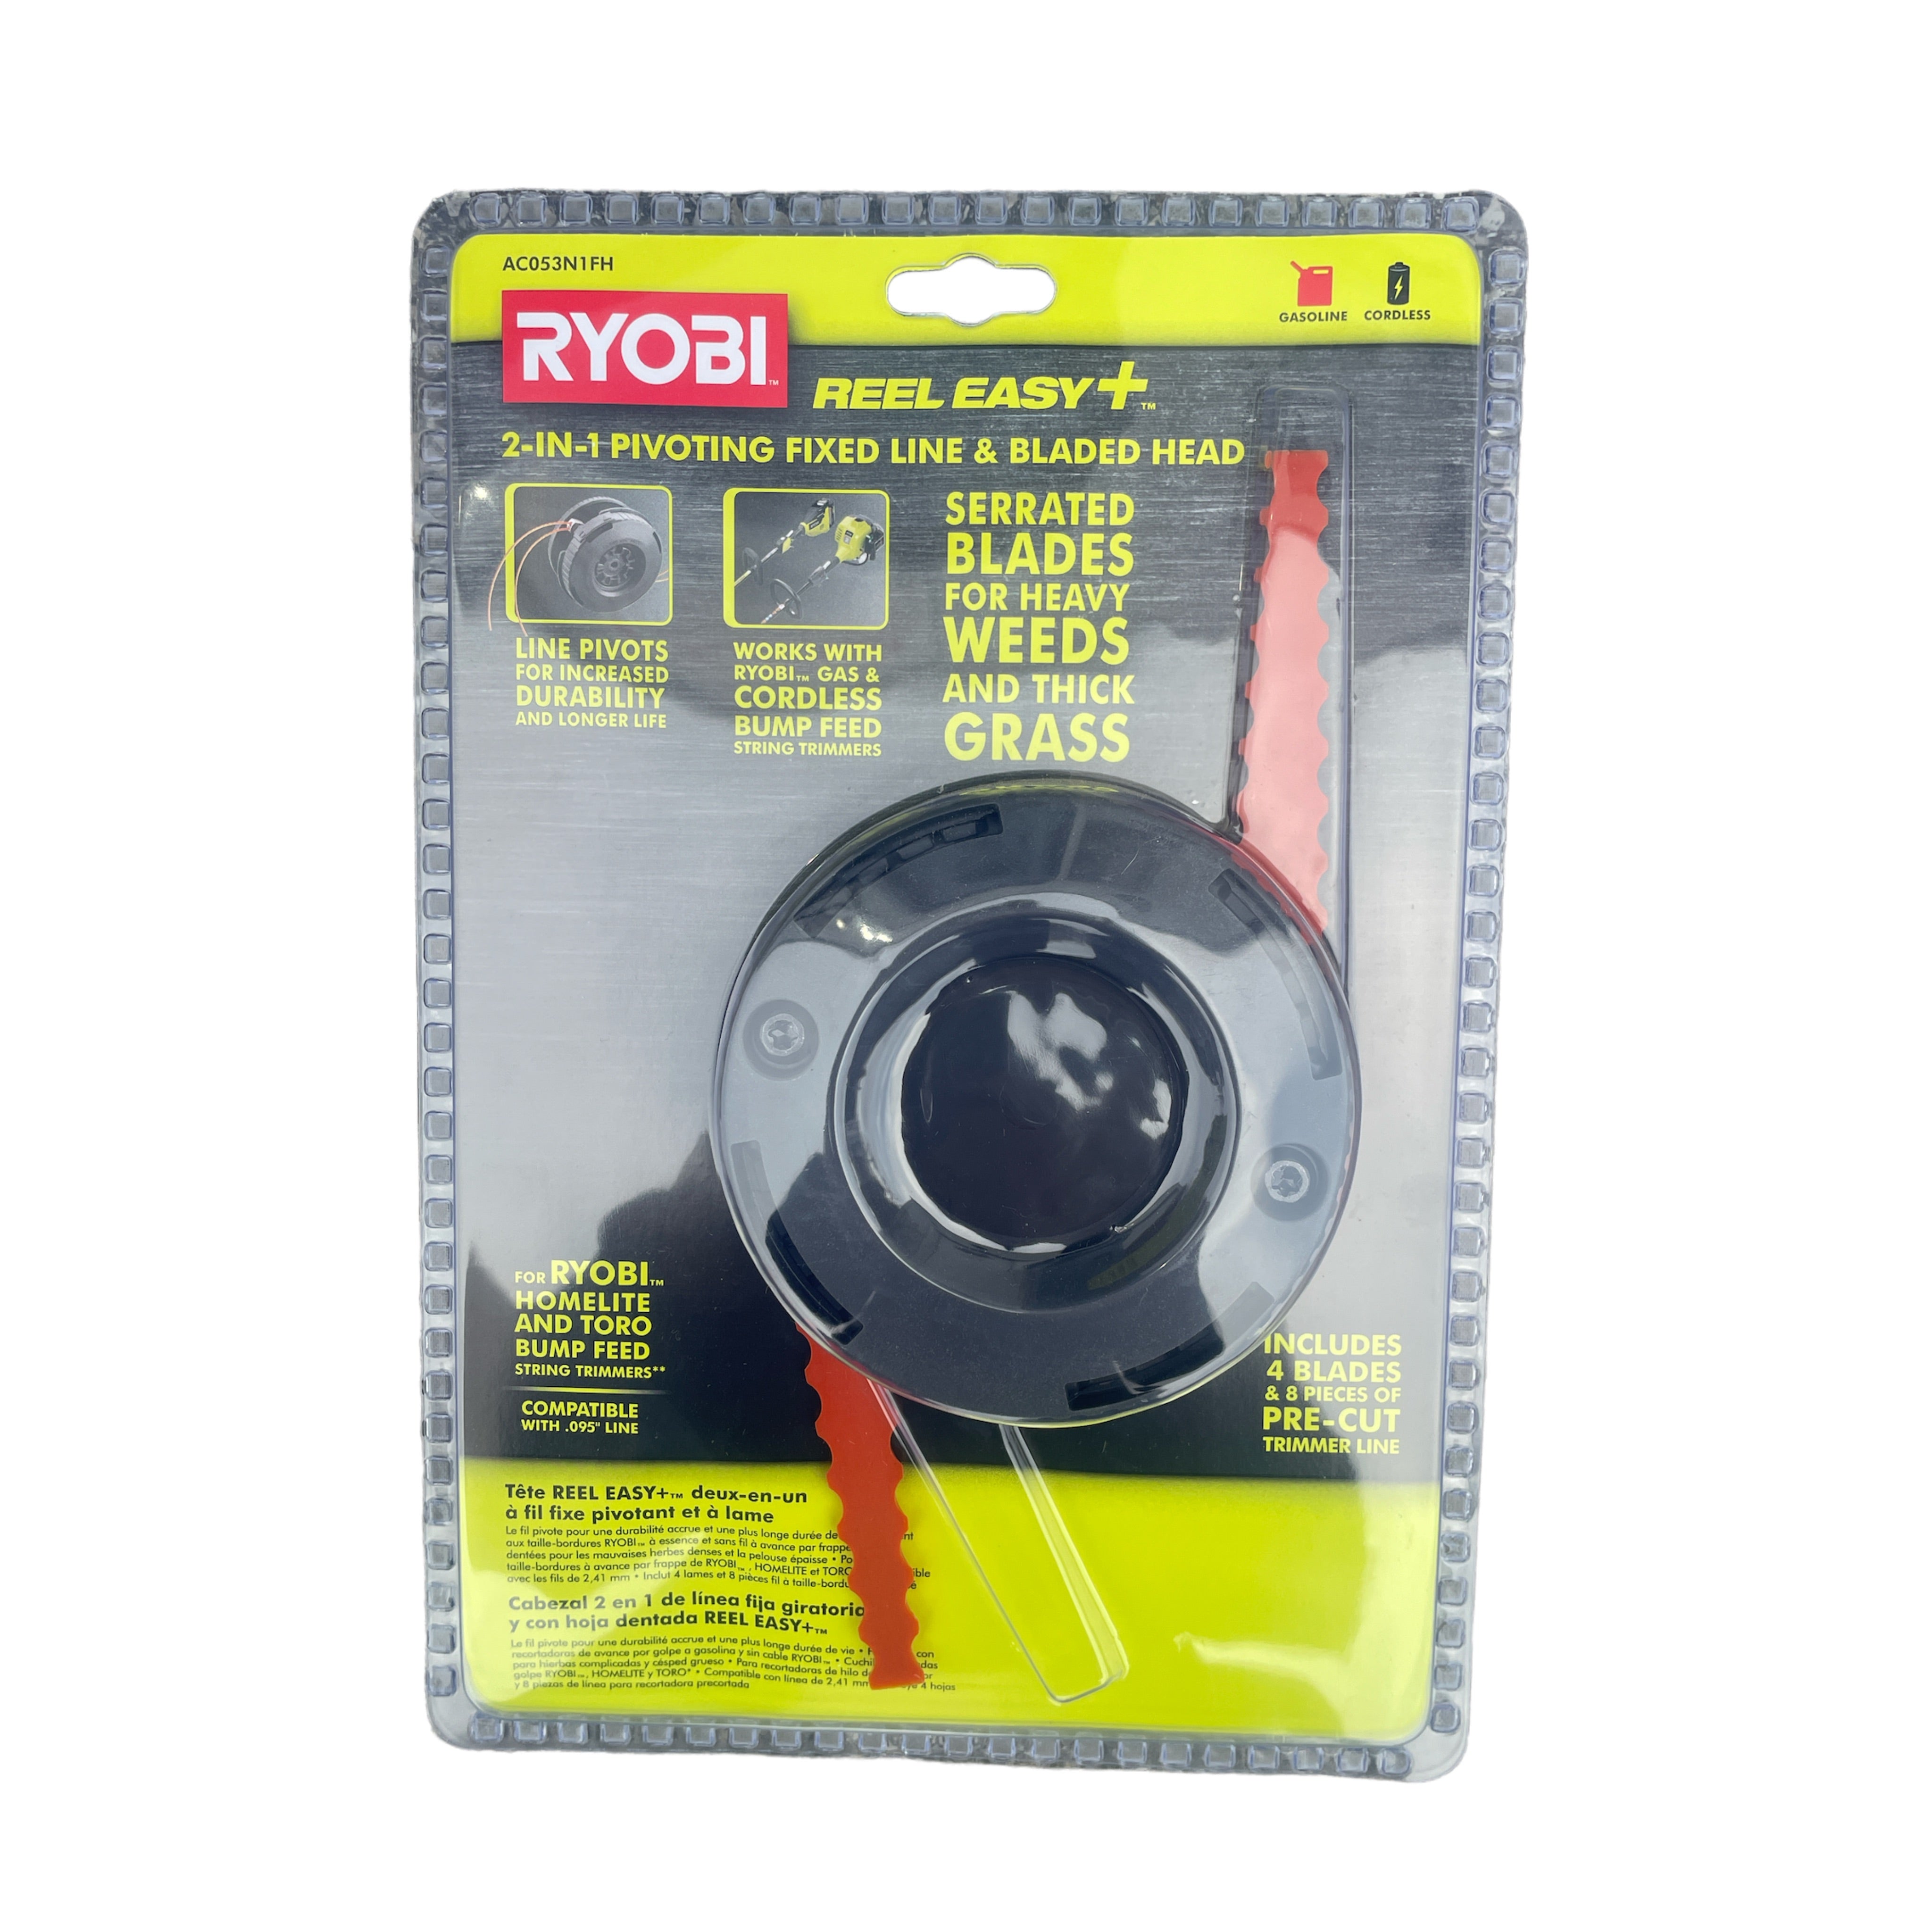 RYOBI REEL EASY+ 2-in-1 Pivoting Fixed Line and Bladed Head for